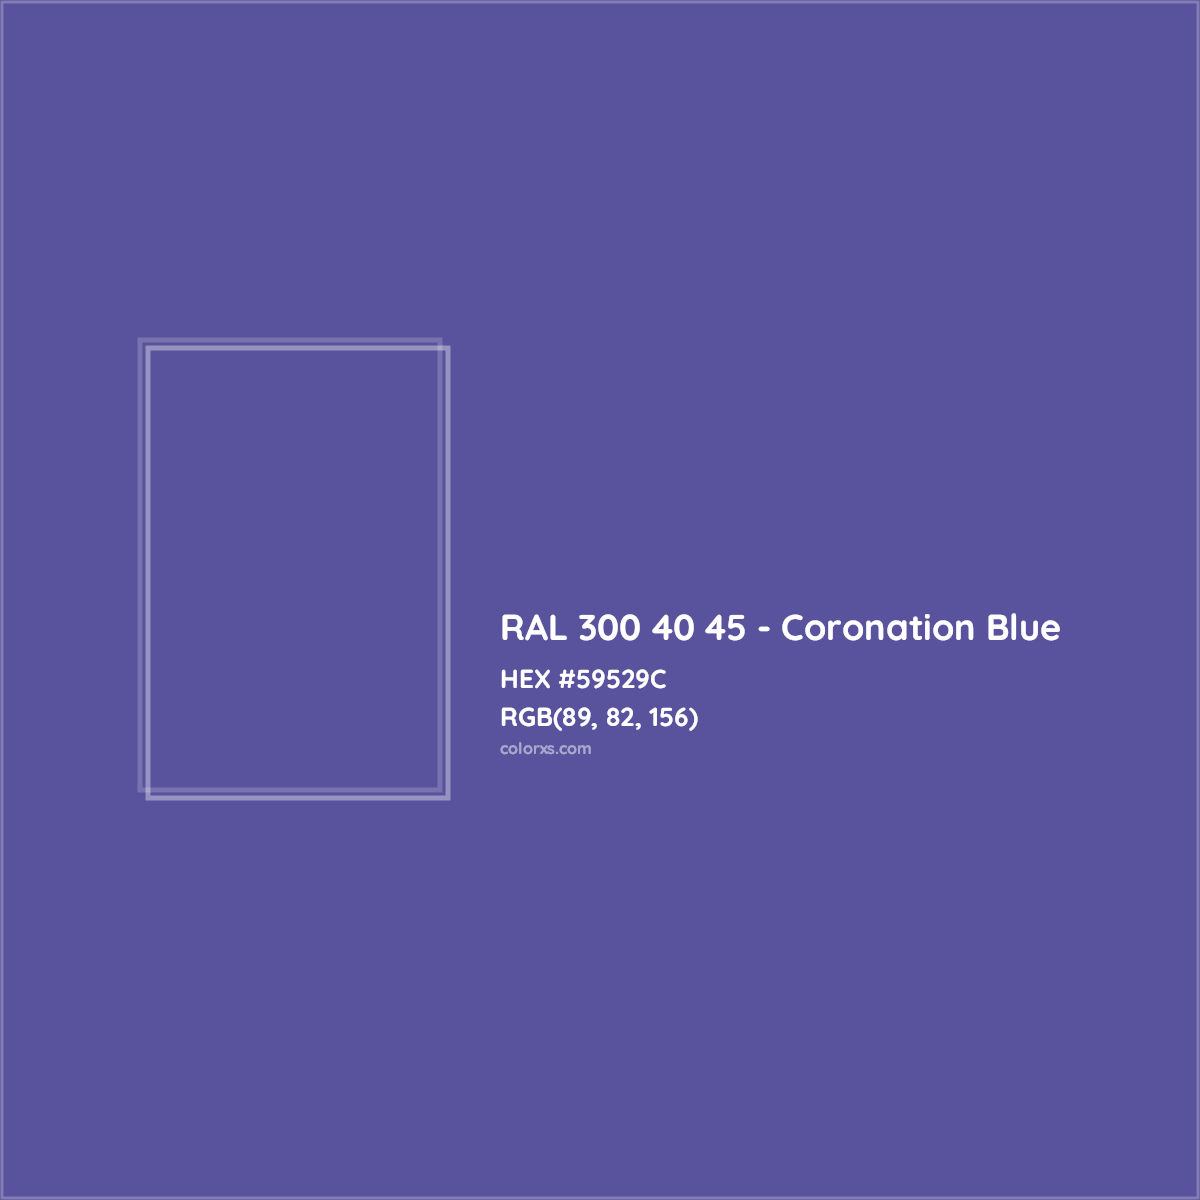 HEX #59529C RAL 300 40 45 - Coronation Blue CMS RAL Design - Color Code